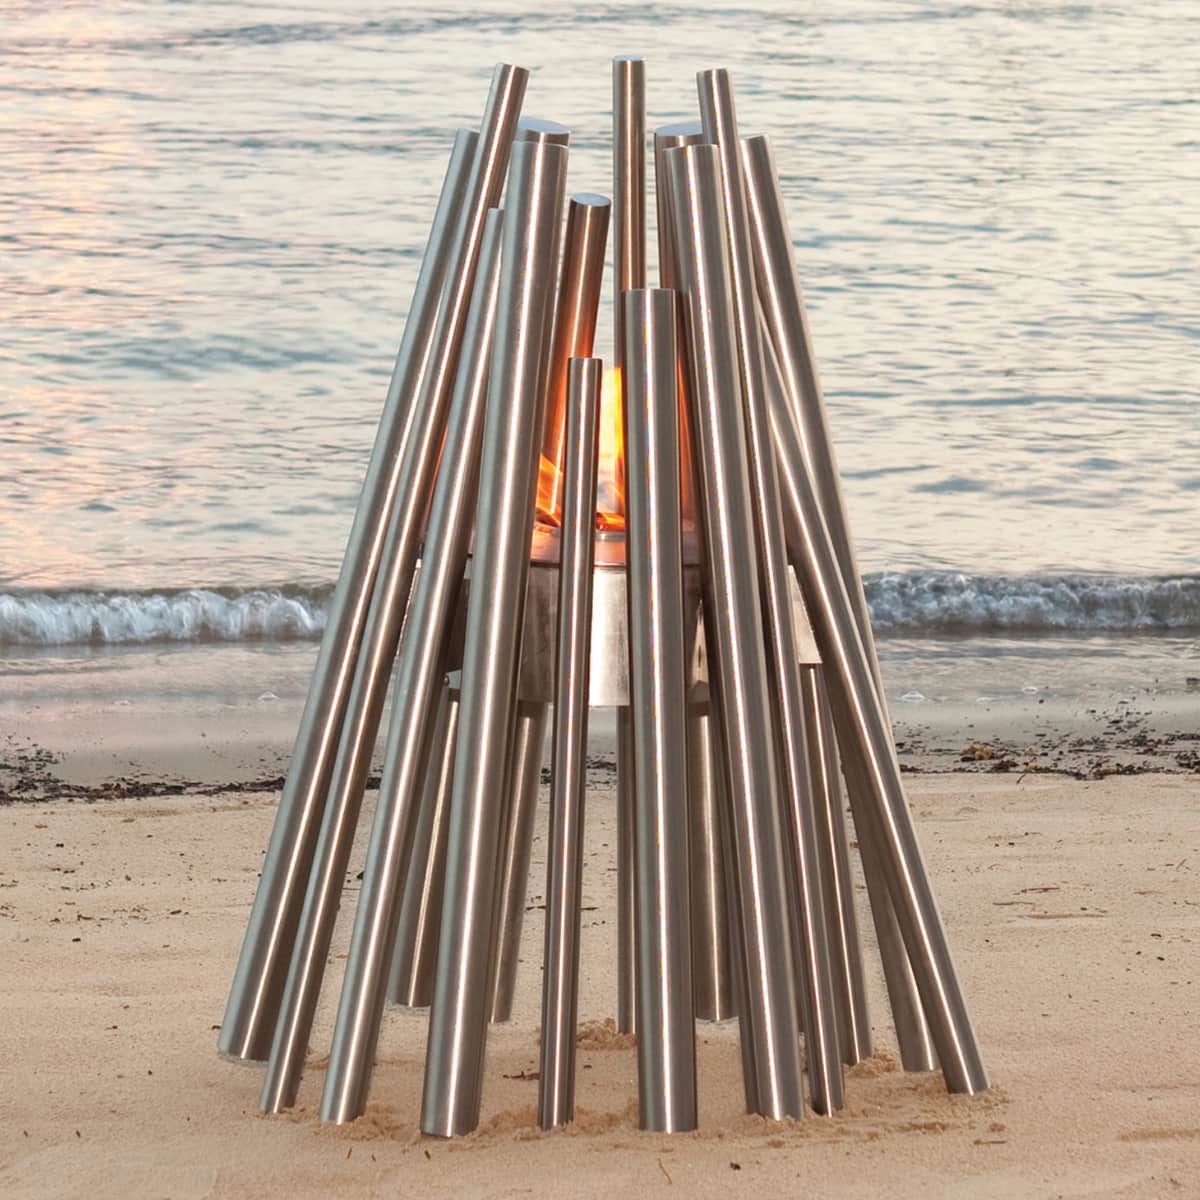 Stainless Steel Portable Fire Pit - EcoSmart Fire